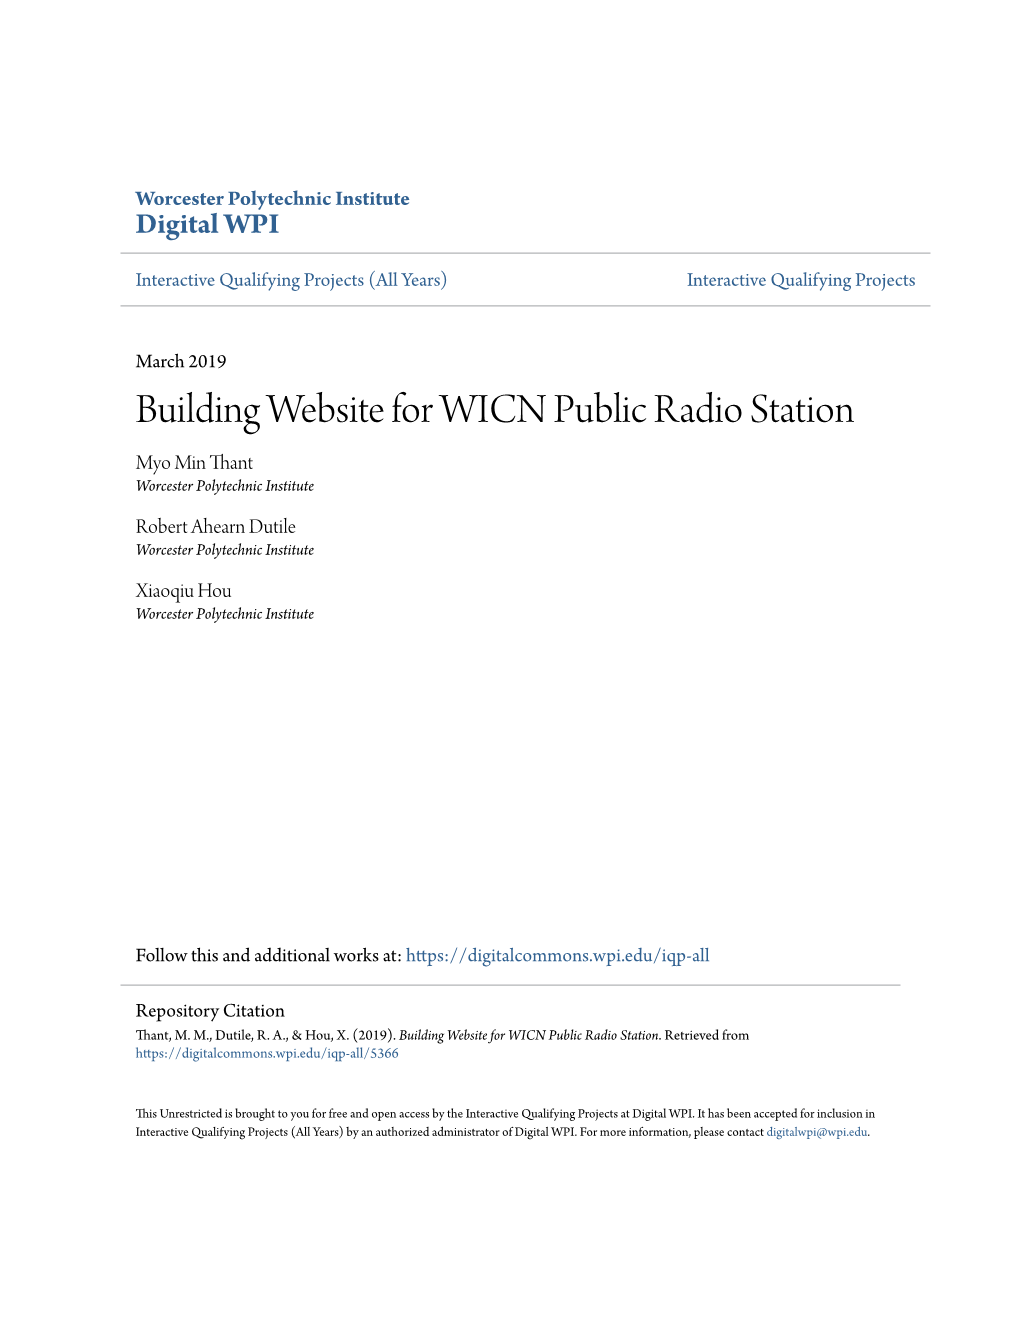 Building Website for WICN Public Radio Station Myo Min Thant Worcester Polytechnic Institute